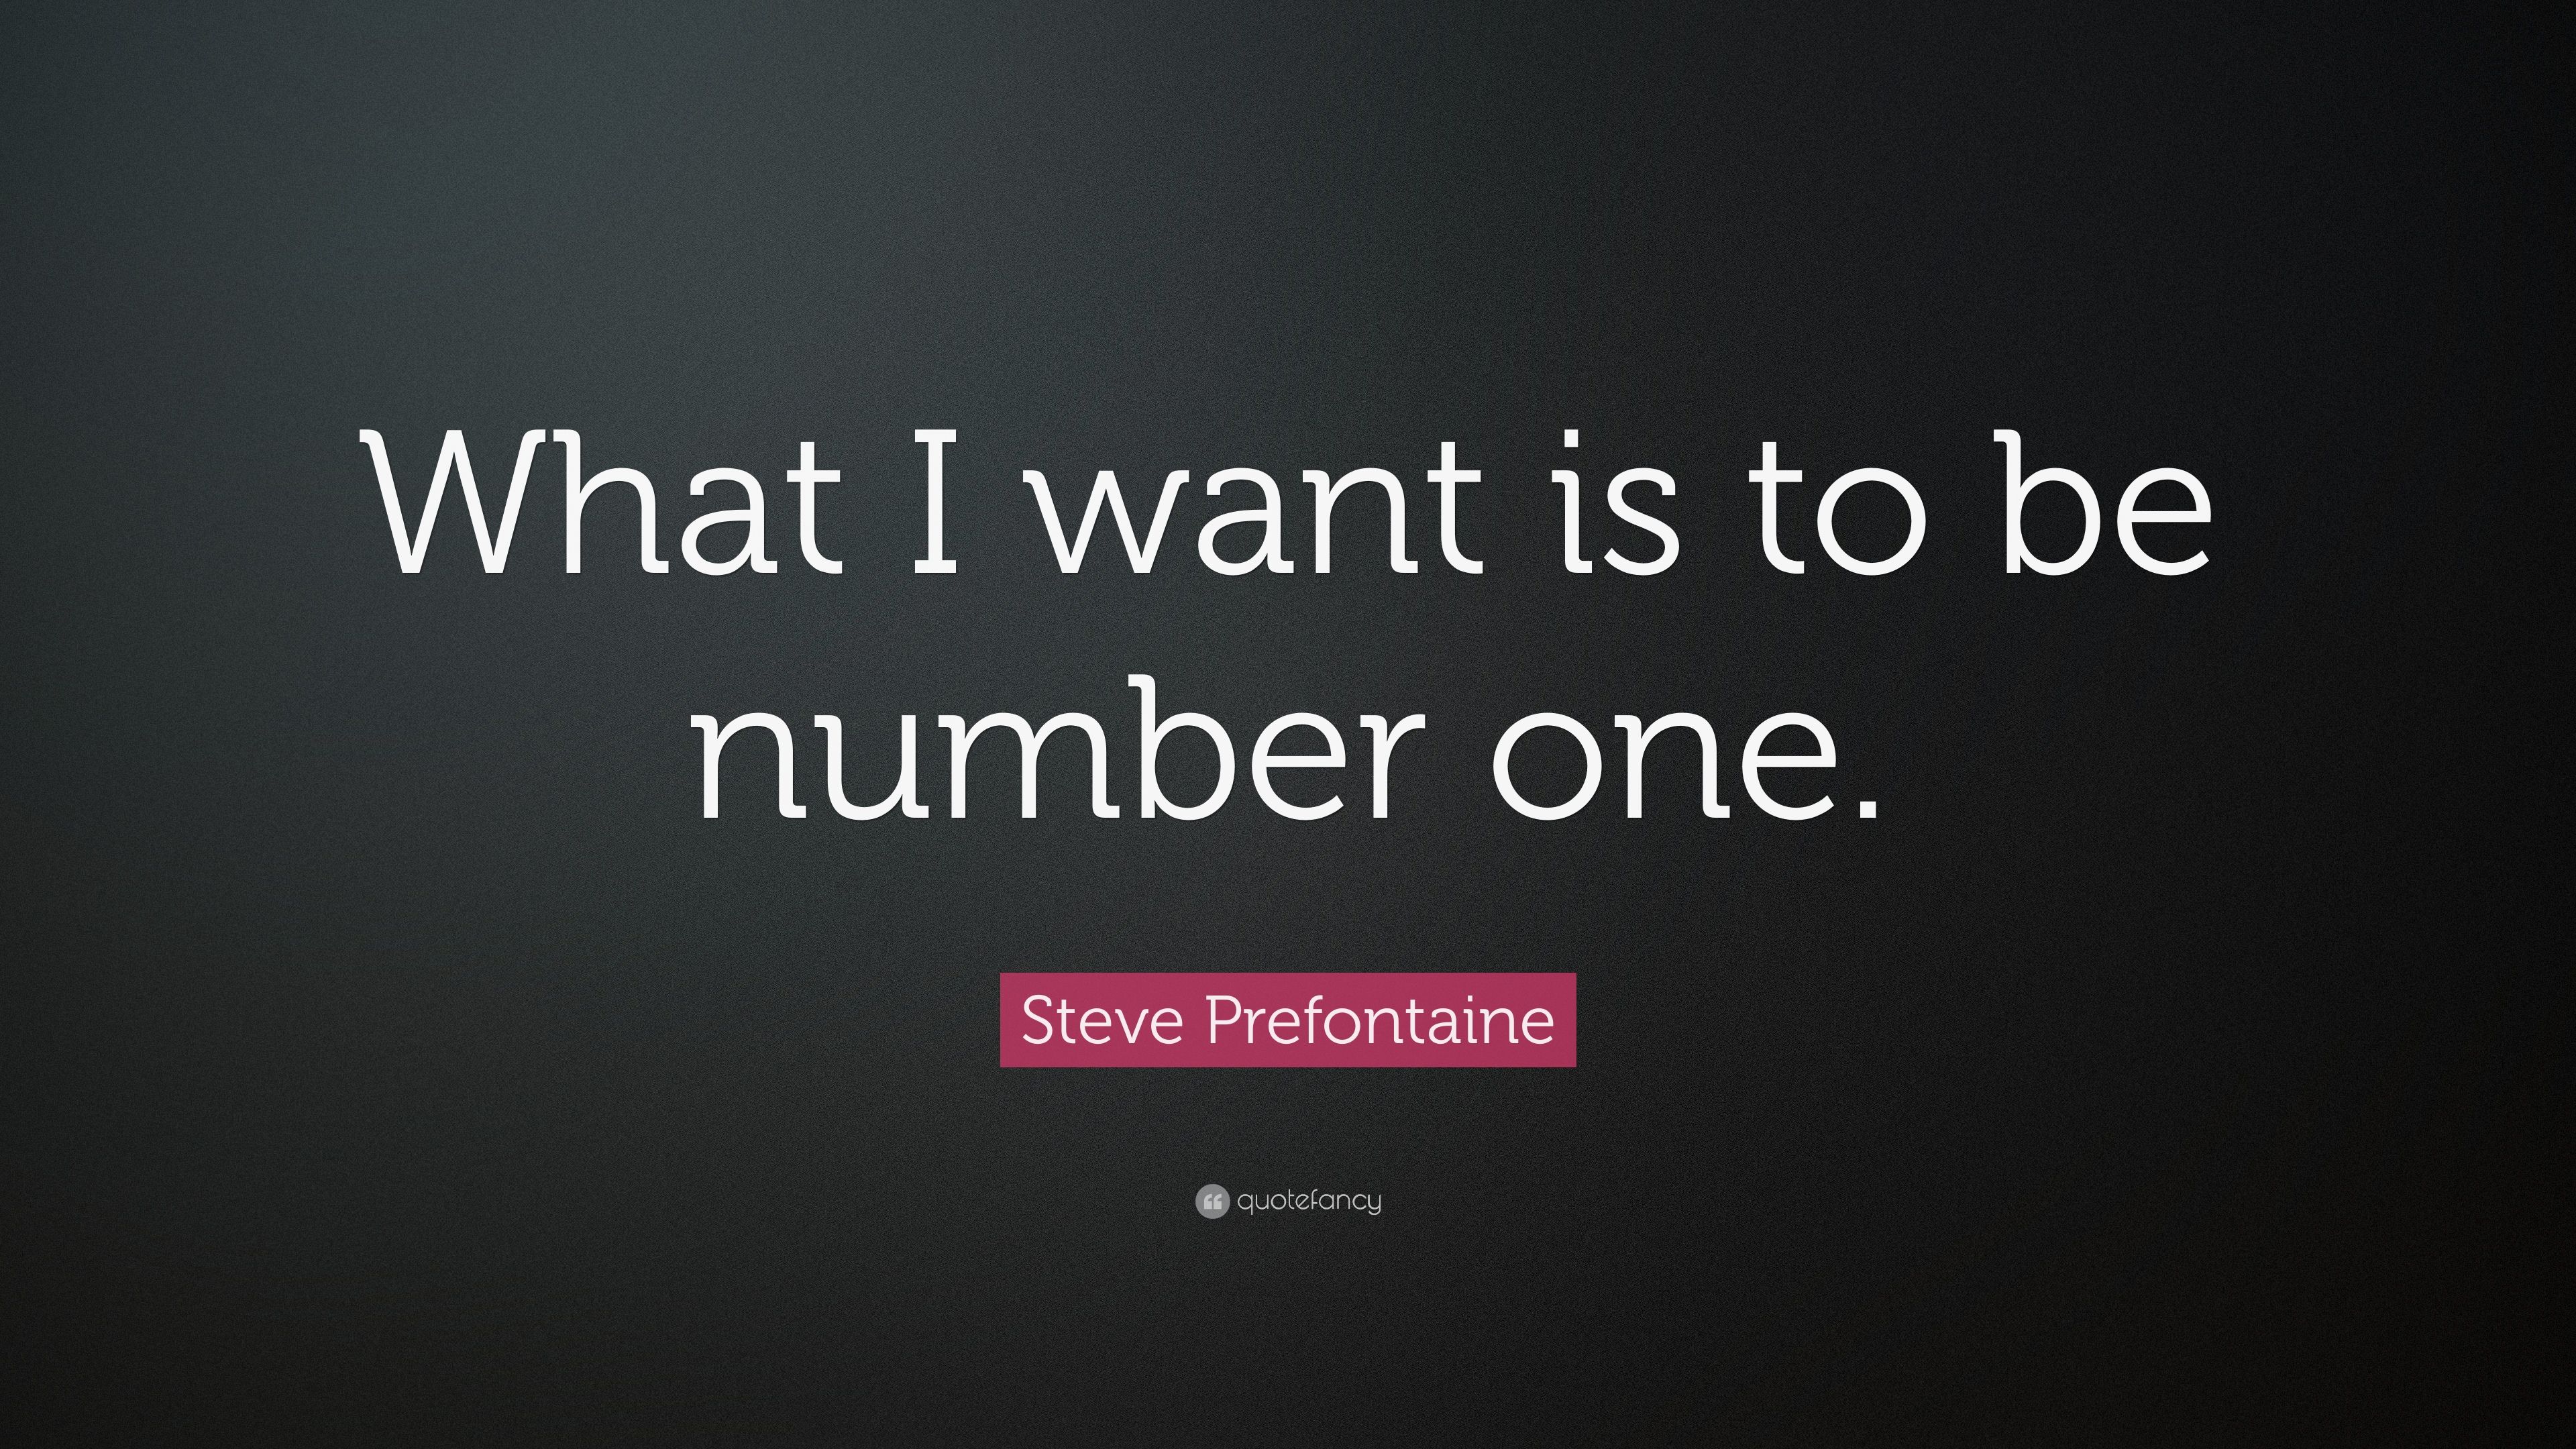 Steve Prefontaine Quote: “What I want is to be number one.” 15